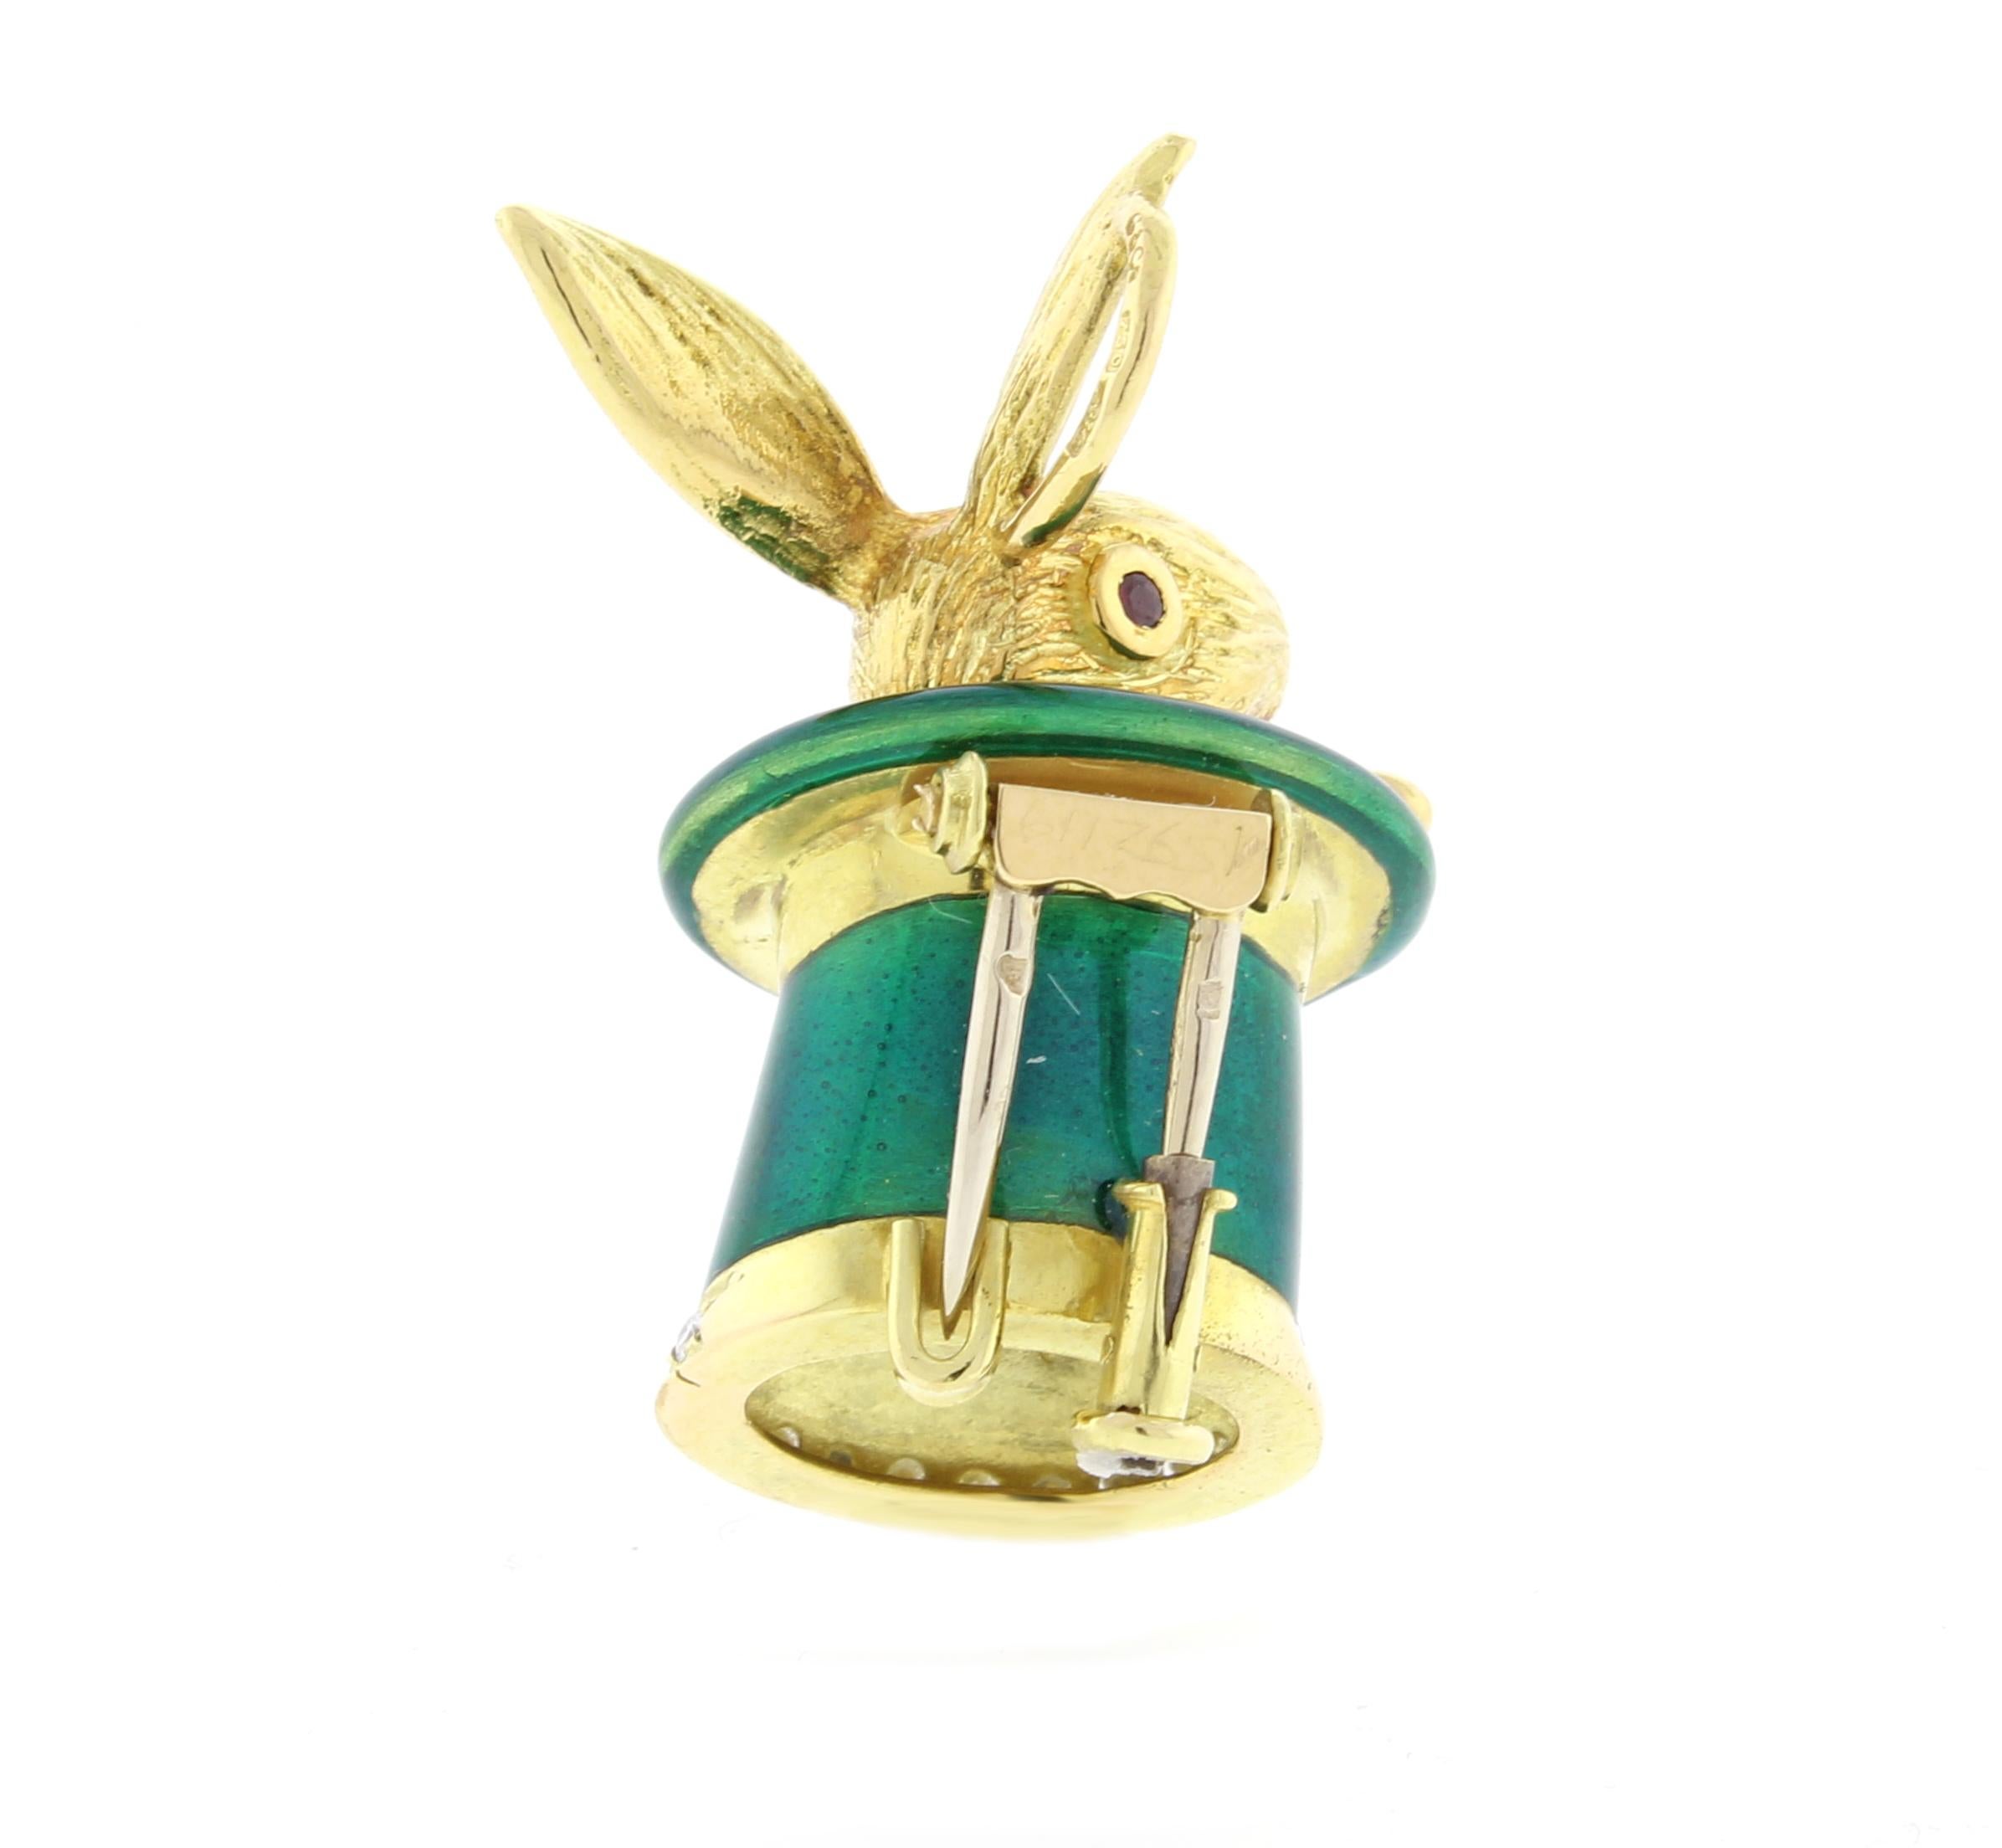  A golden rabbit pops his head from a green enamel and diamond hat in this French made pendant brooch
♦ 18 karat
♦  Diamonds =..10
♦ Circa 1995
♦ Weight 23.5 grams
♦ Dimensions: 1¼1 X 11¾ 
♦ Condition: Excellent , pre-owned
